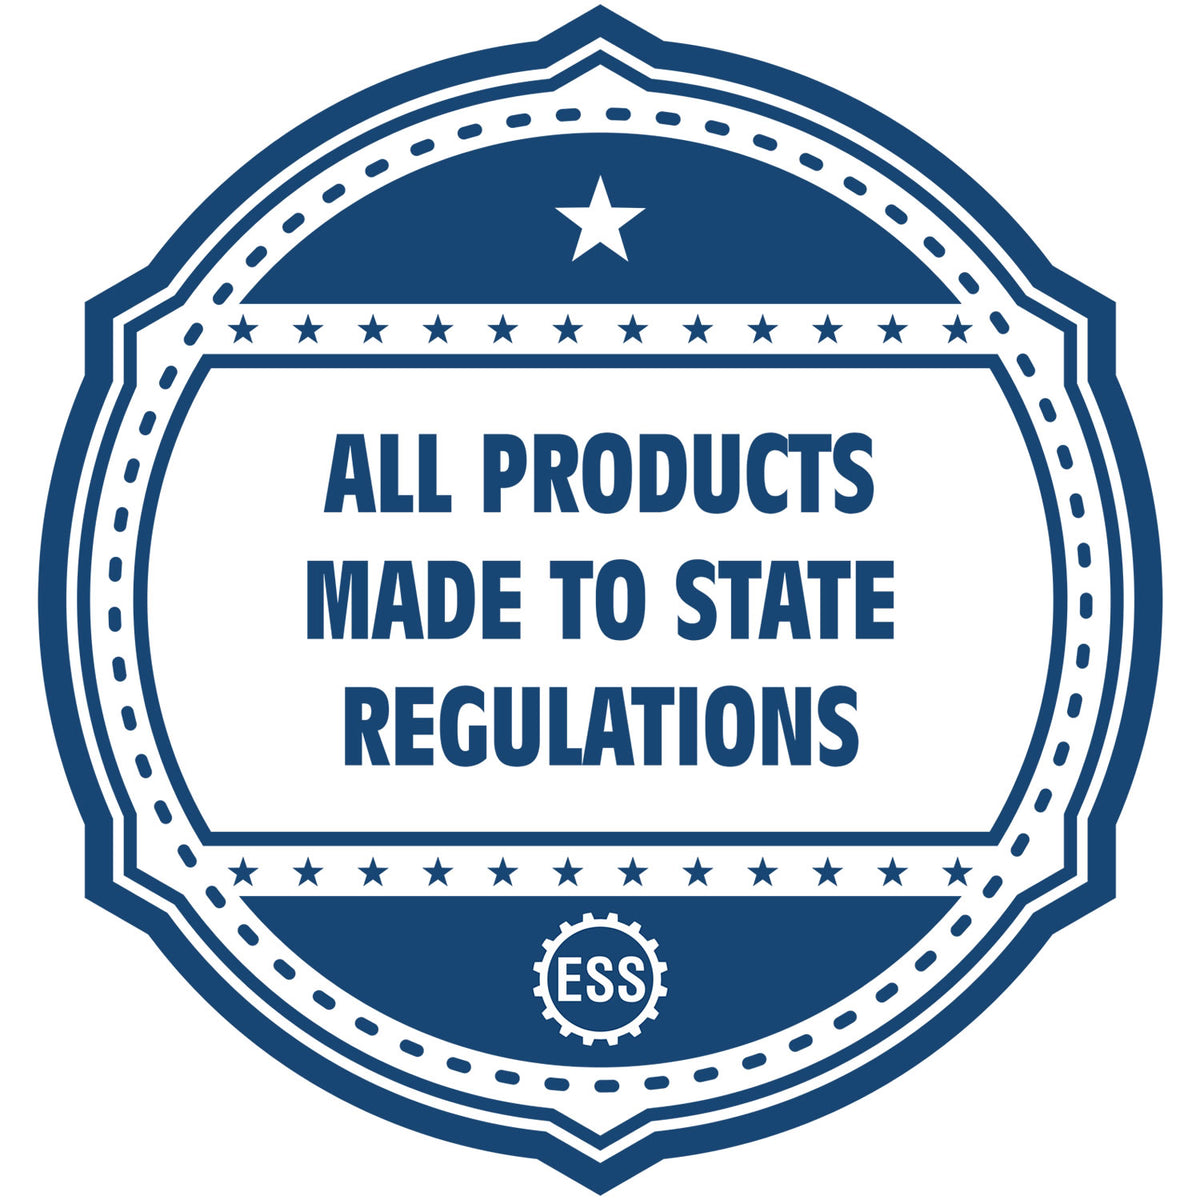 A blue icon or badge for the Slim Pre-Inked Georgia Professional Geologist Seal Stamp showing that this product is made in compliance with state regulations.